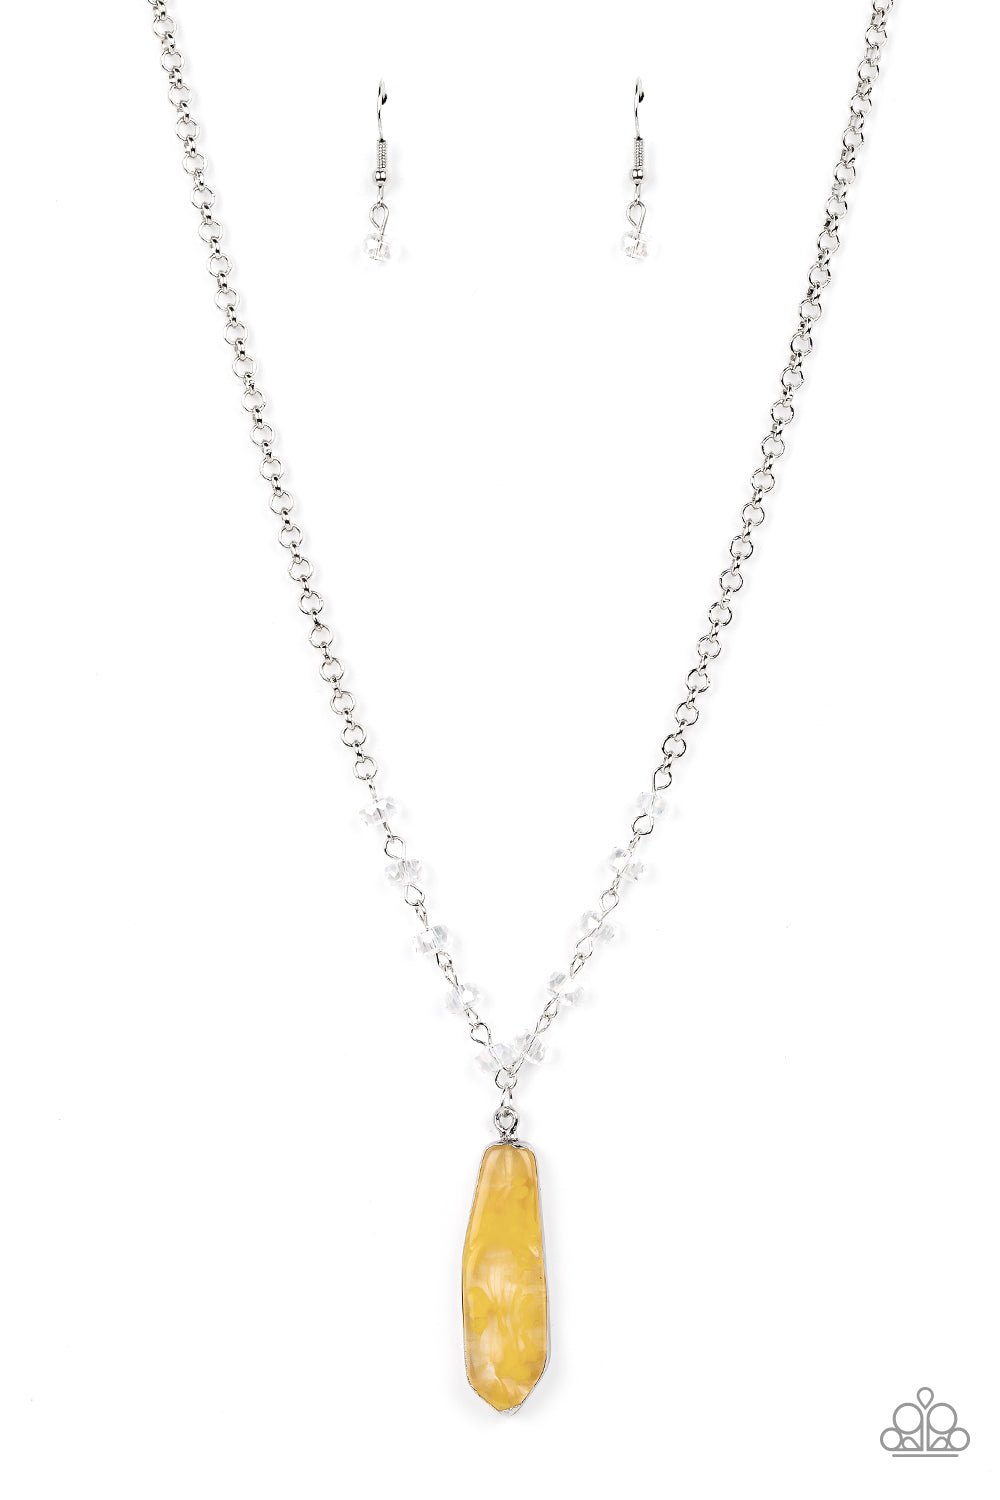 Magical Remedy Paparazzi Accessories Necklace with Earrings Yellow